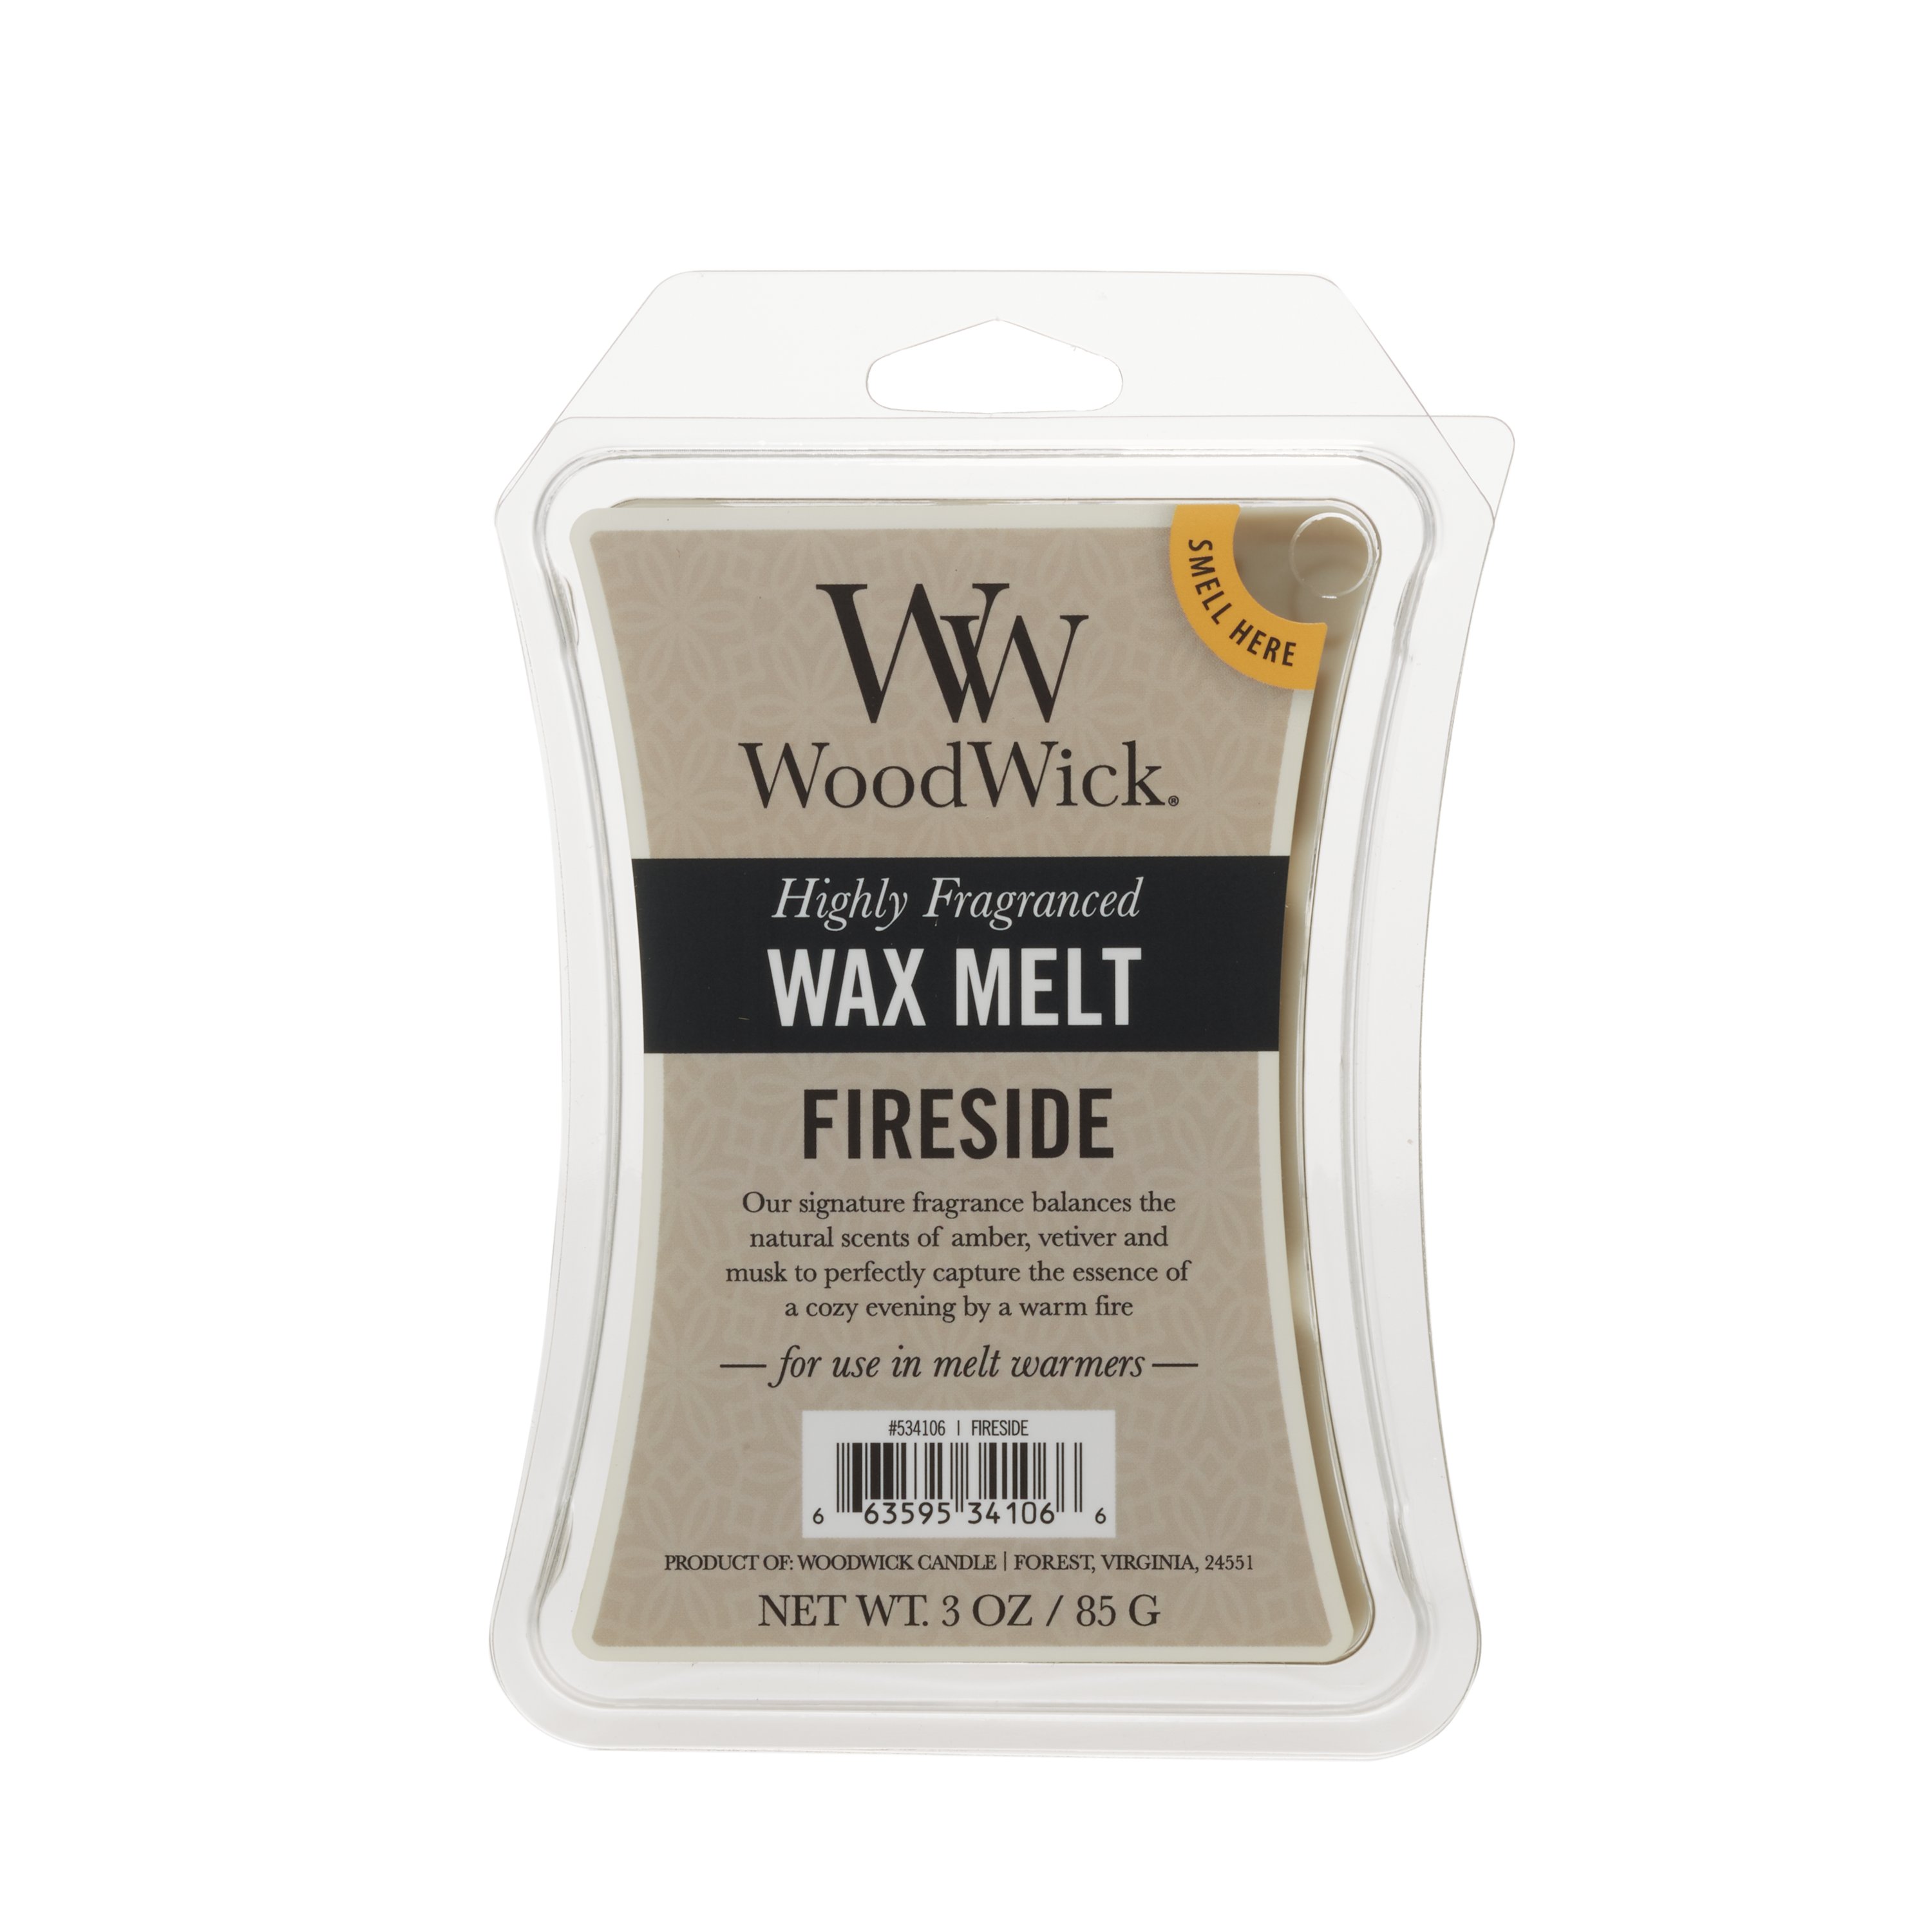 The Best Smelling Wax Melts To Make Your Home Smell Cozy, 10 Must-Try  Scents